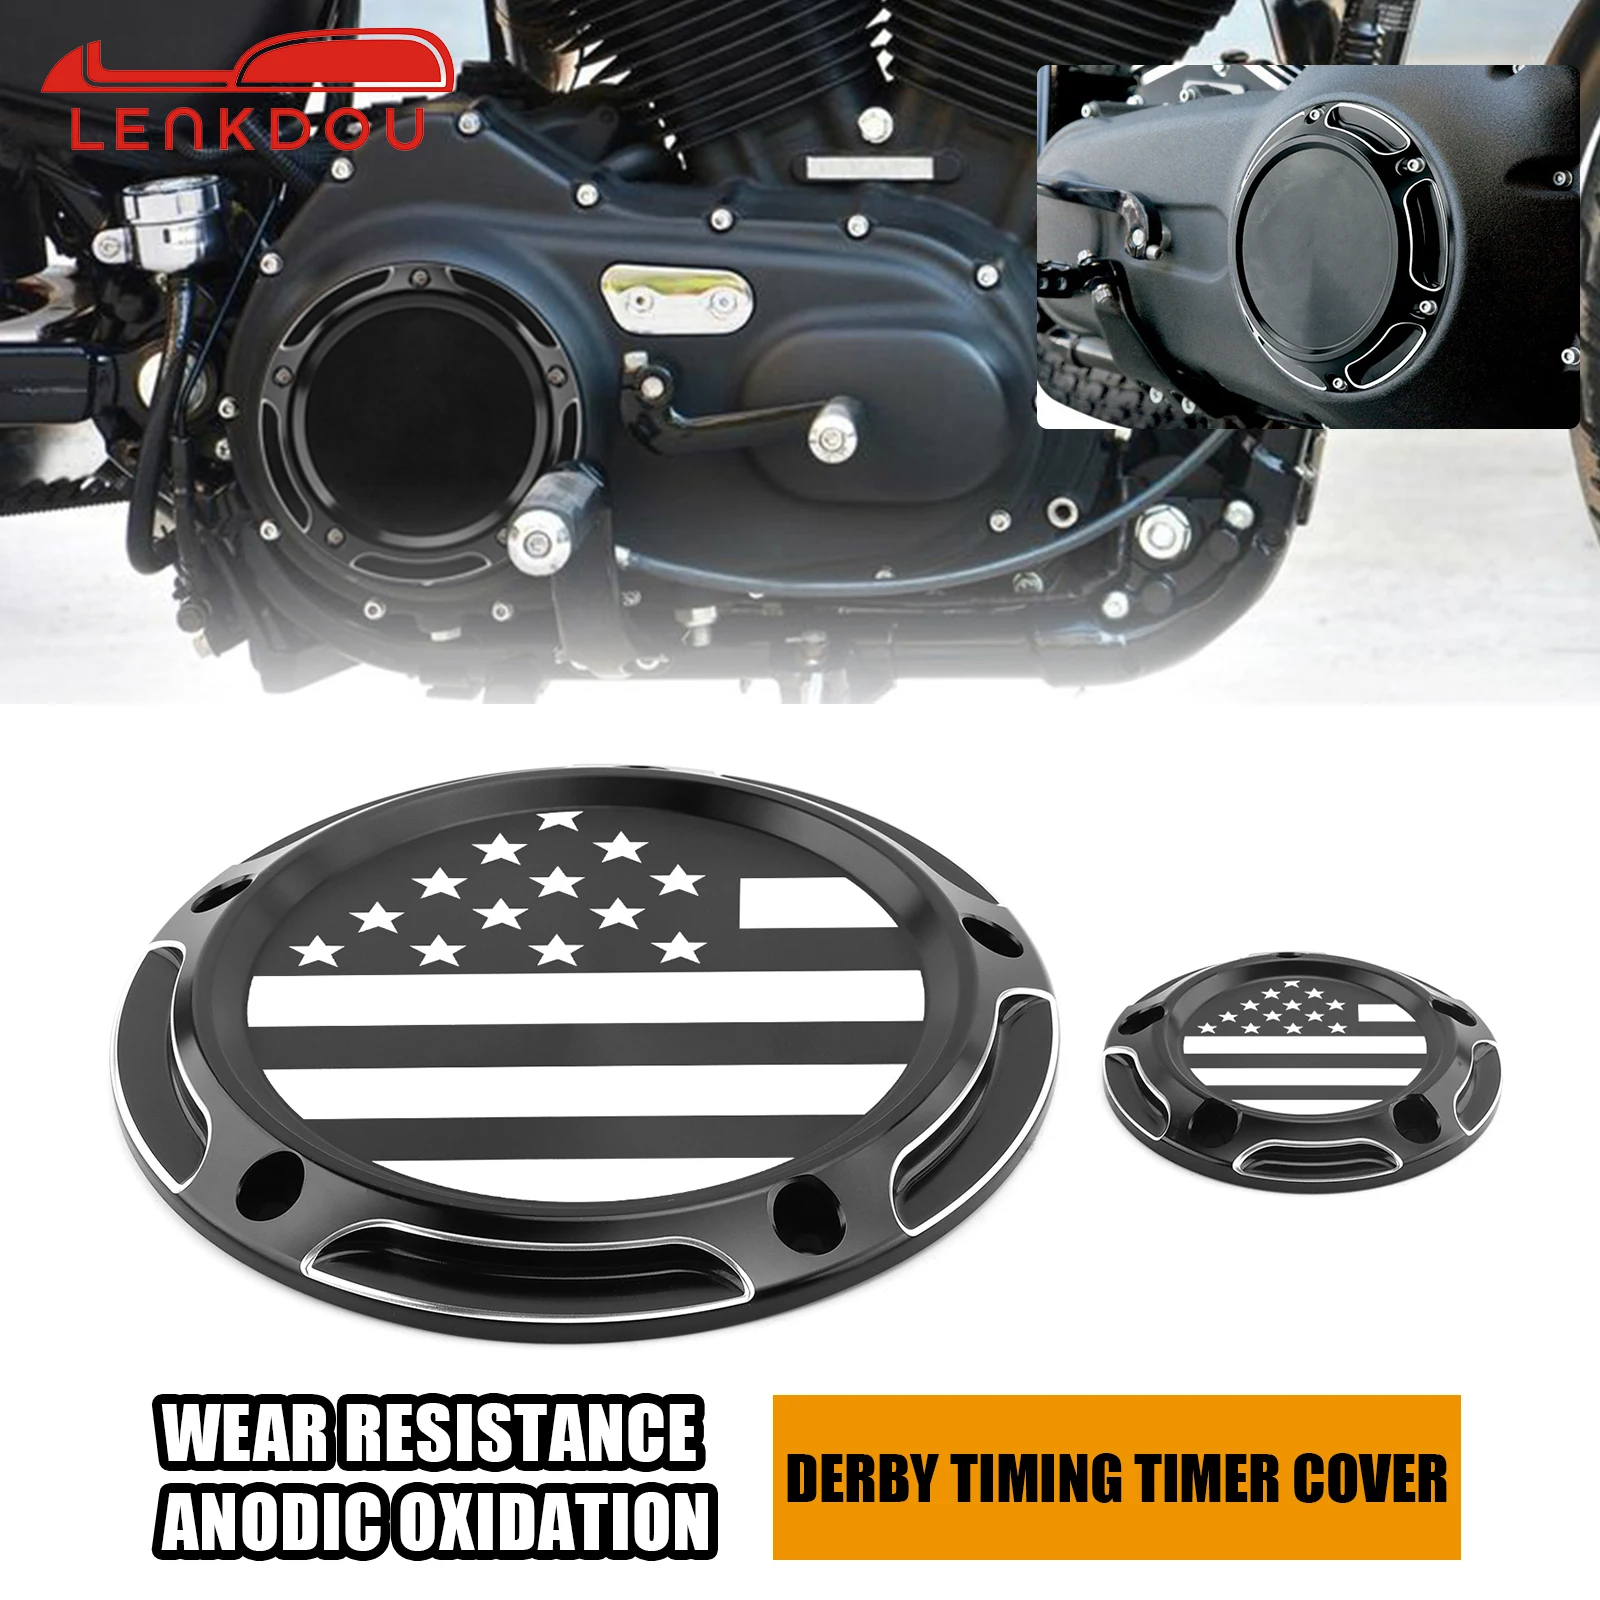 

Derby Timing Timer Clutch Cover For Harley Dyna Street Bob Low Rider Softail Fat Boy Breakout Touring Road King Electra Glide